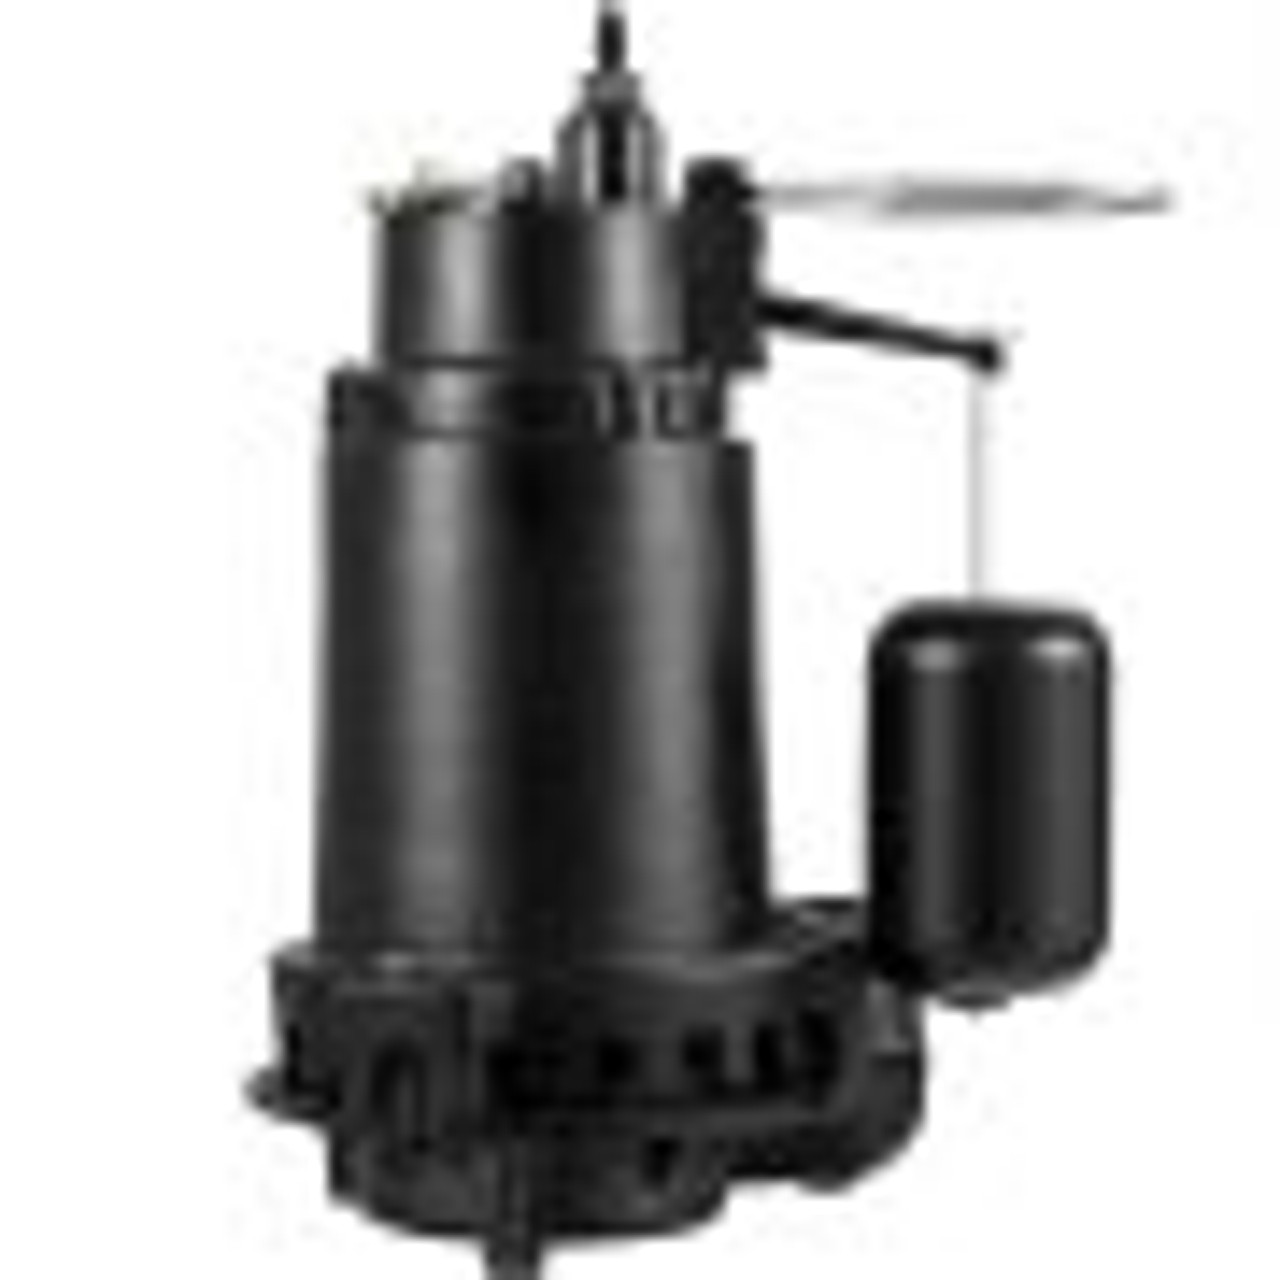 1HP Sewage Pump, 5600 GPH Cast Iron Submersible Sump Pump with Automatic Snap-action Float Switch, Heavy-Duty Submersible Sewage, Effluent Pump for Septic Tank, Basement, Flooding Area